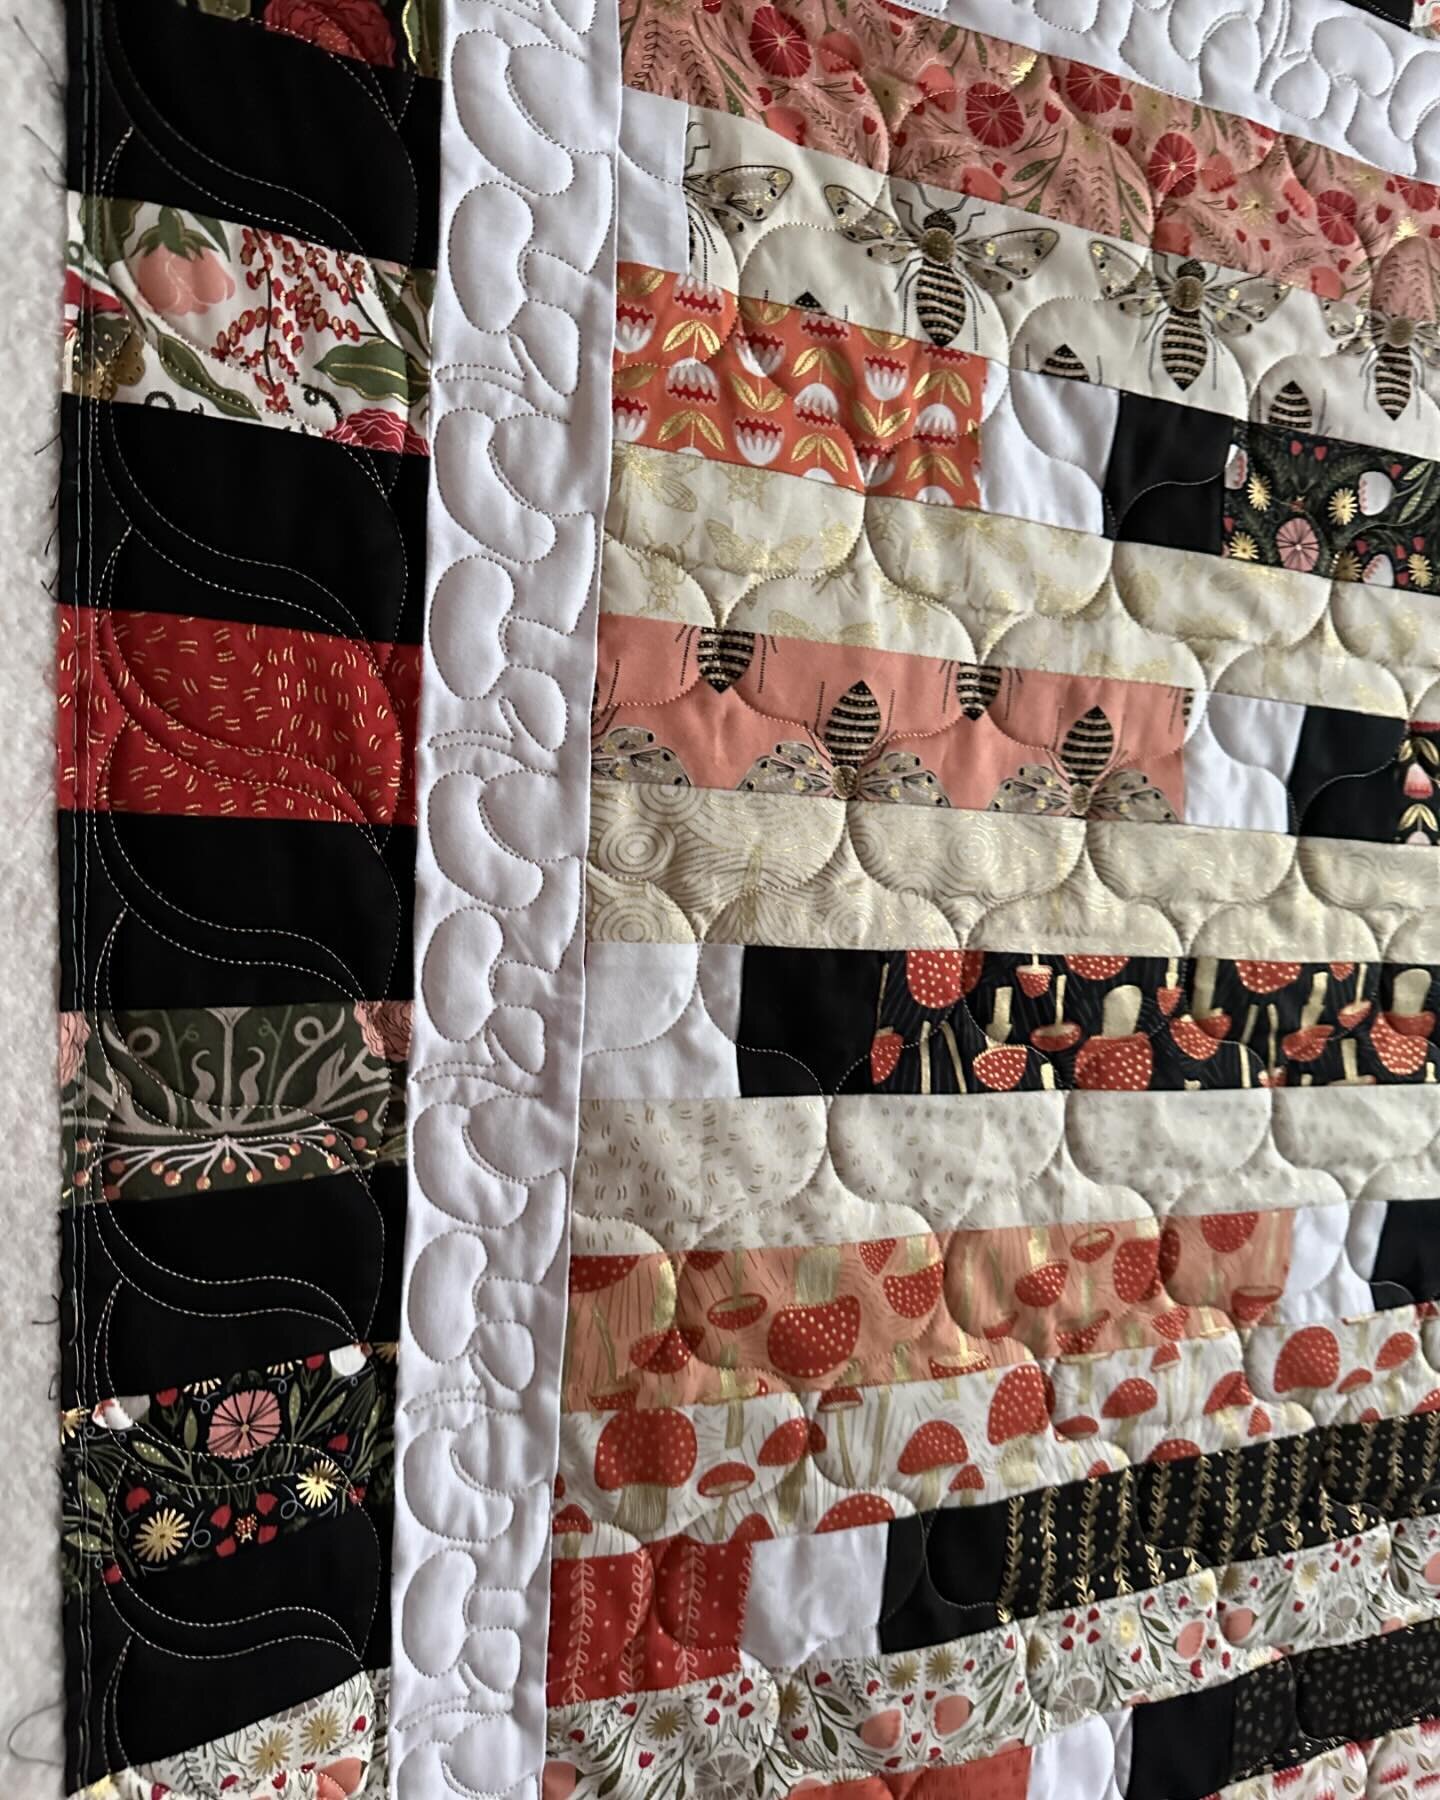 Sister Chicks Quilting receives your quilts, finished them with beautiful stitching then ships them back to your homes. We would love to include your quilts in our rotation. Visit our website to submit one of your quilts for quilting. 
HTTP:// sister